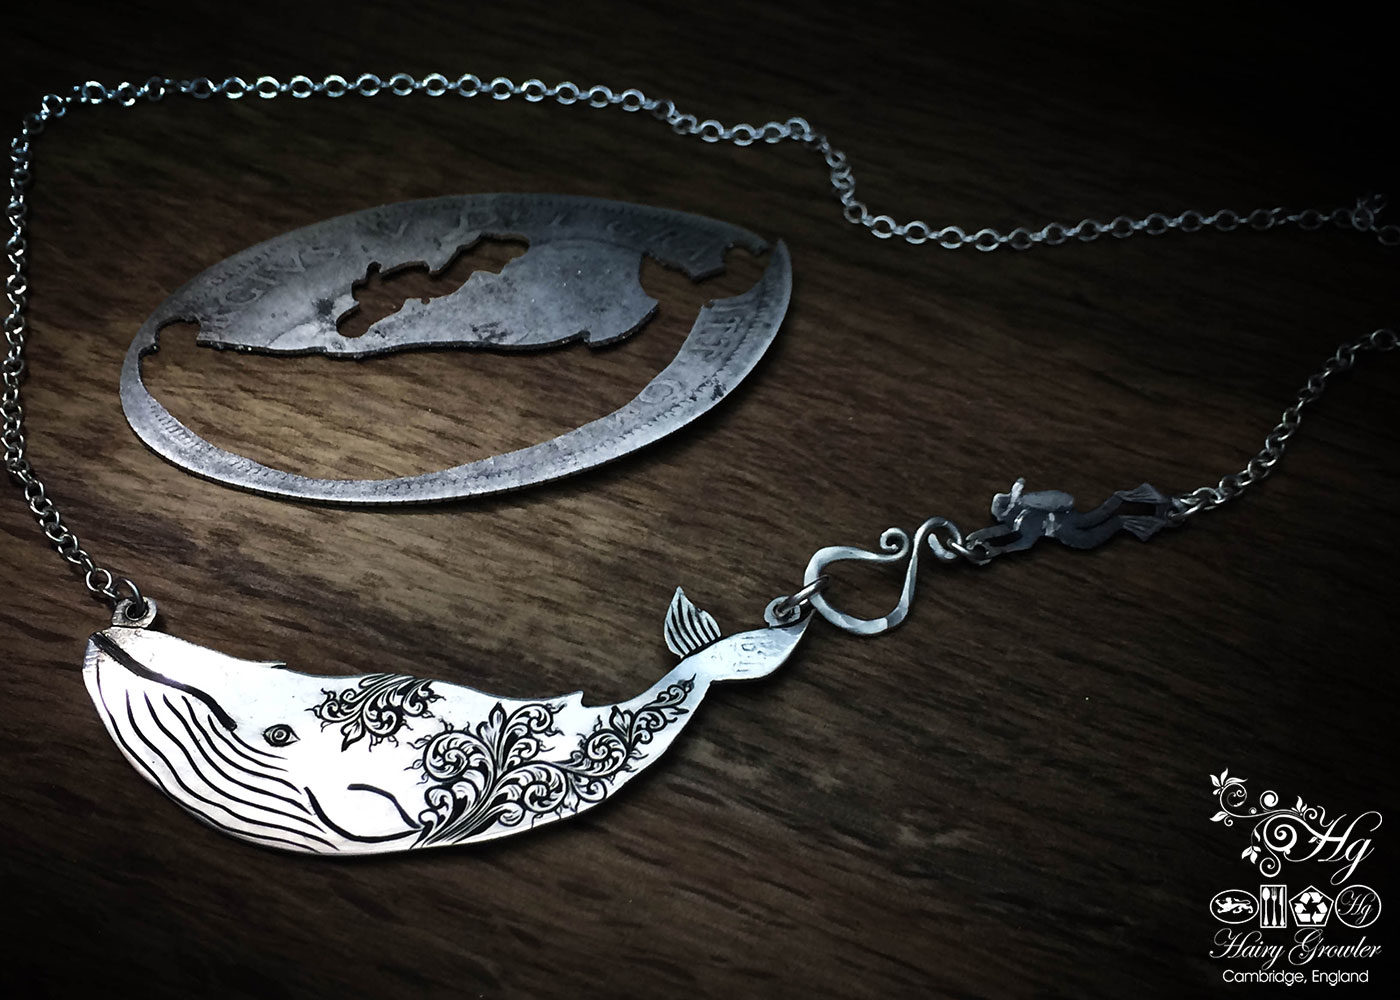 Handcrafted and recycled sterling silver half crown coin leviathan whale necklace